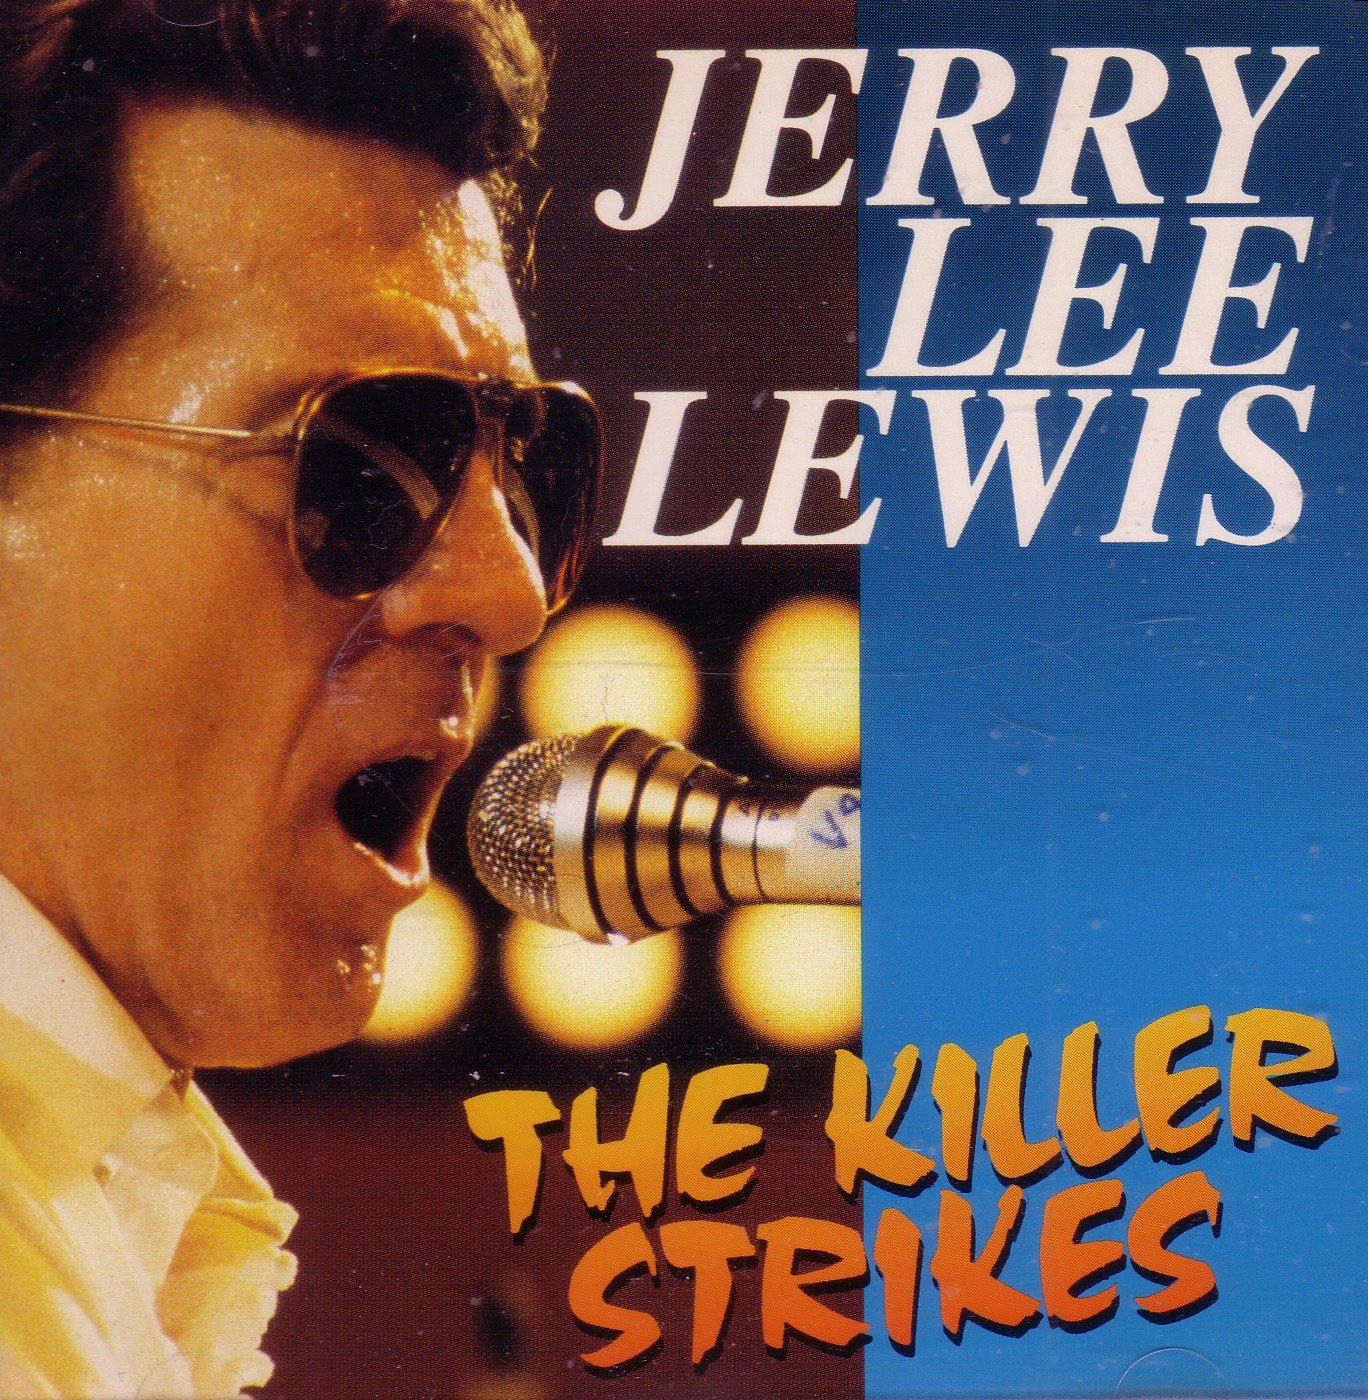 Jerry Lee Lewis - The Killer Strikes (1990) FLAC Download